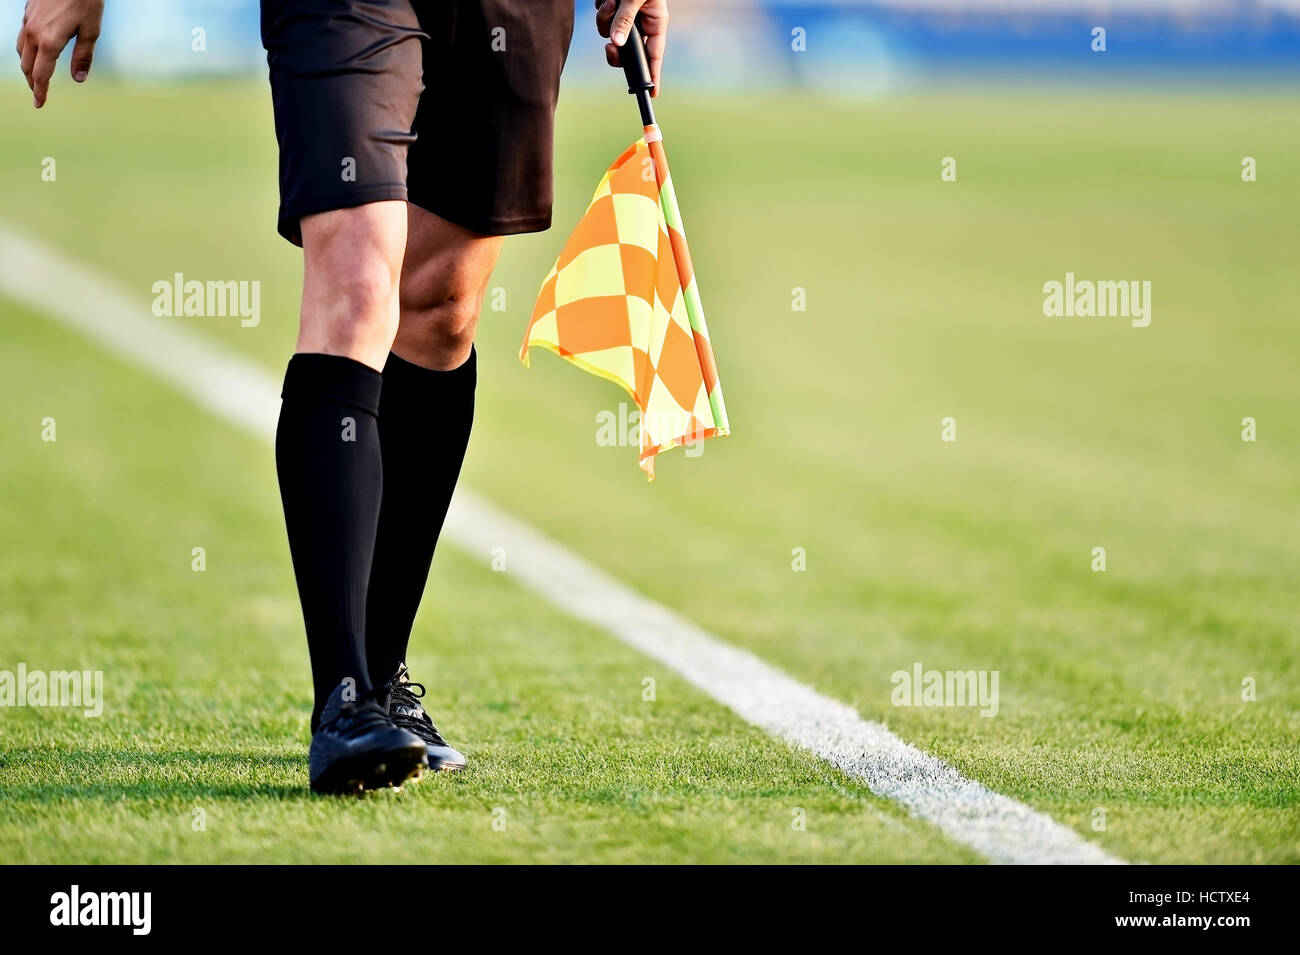 Assistant referee moving along the sideline during a soccer match Stock Photo